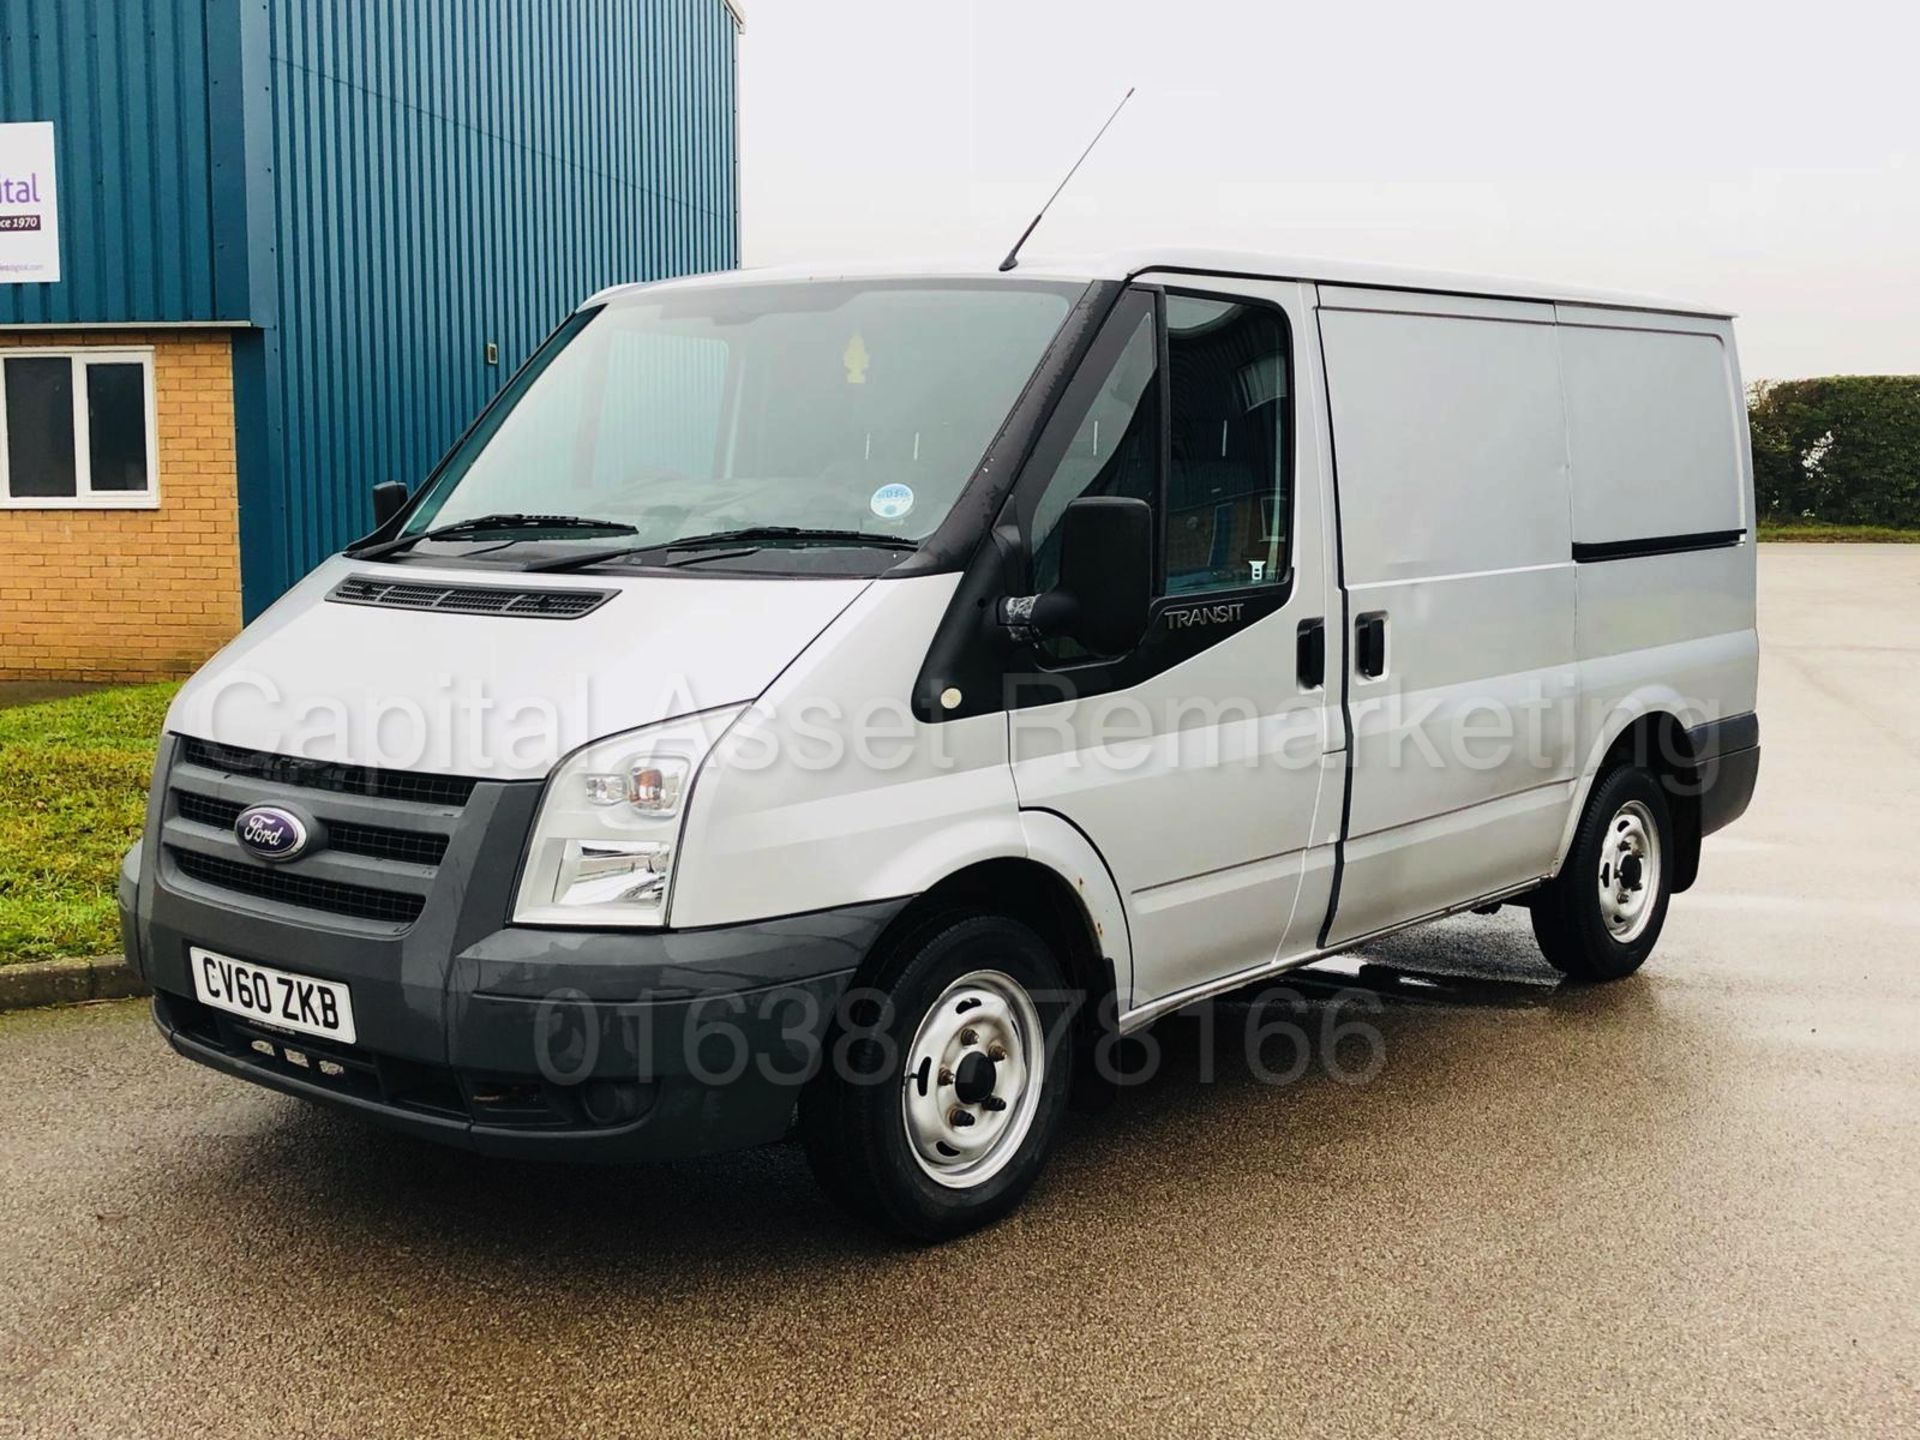 FORD TRANSIT 85 T260S FWD 'SWB' (2011 MODEL) '2.2 TDCI - 85 BHP - 5 SPEED' **ULTRA LOW MILES** - Image 3 of 22